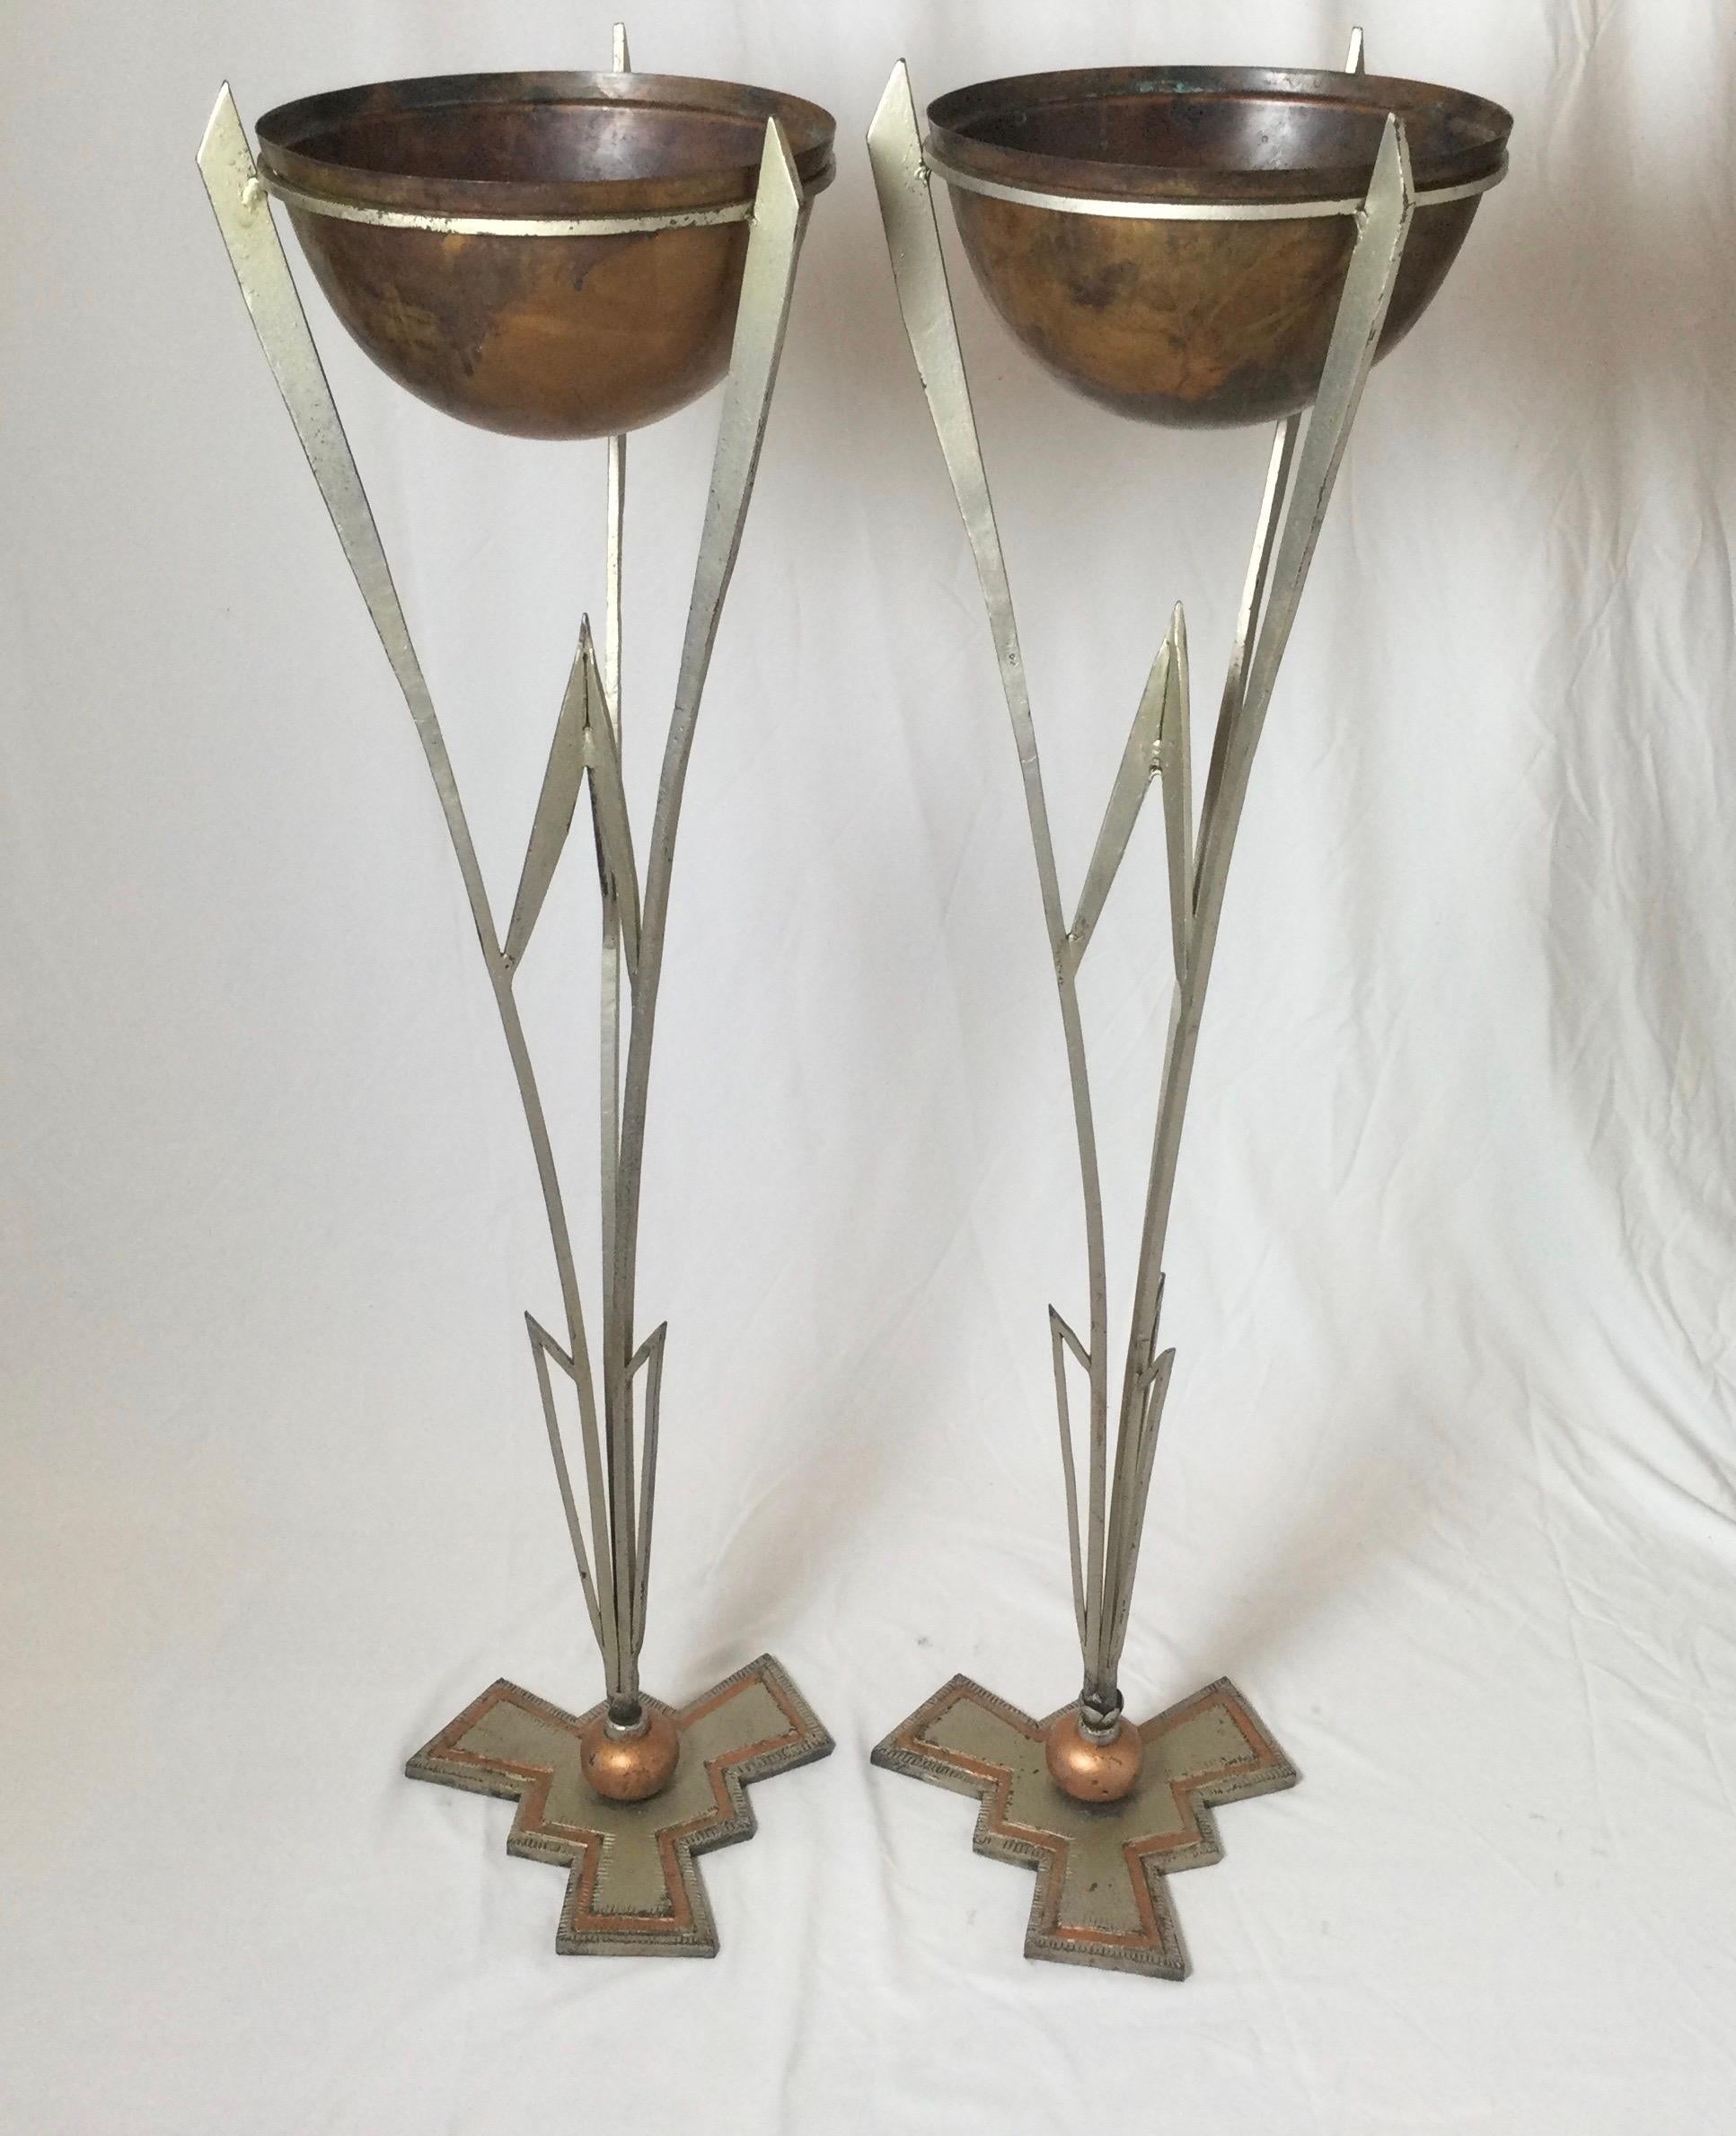 Pair of Art Deco Iron and Copper Plant Stands Attributed to Warren MacArthur In Good Condition For Sale In Lambertville, NJ